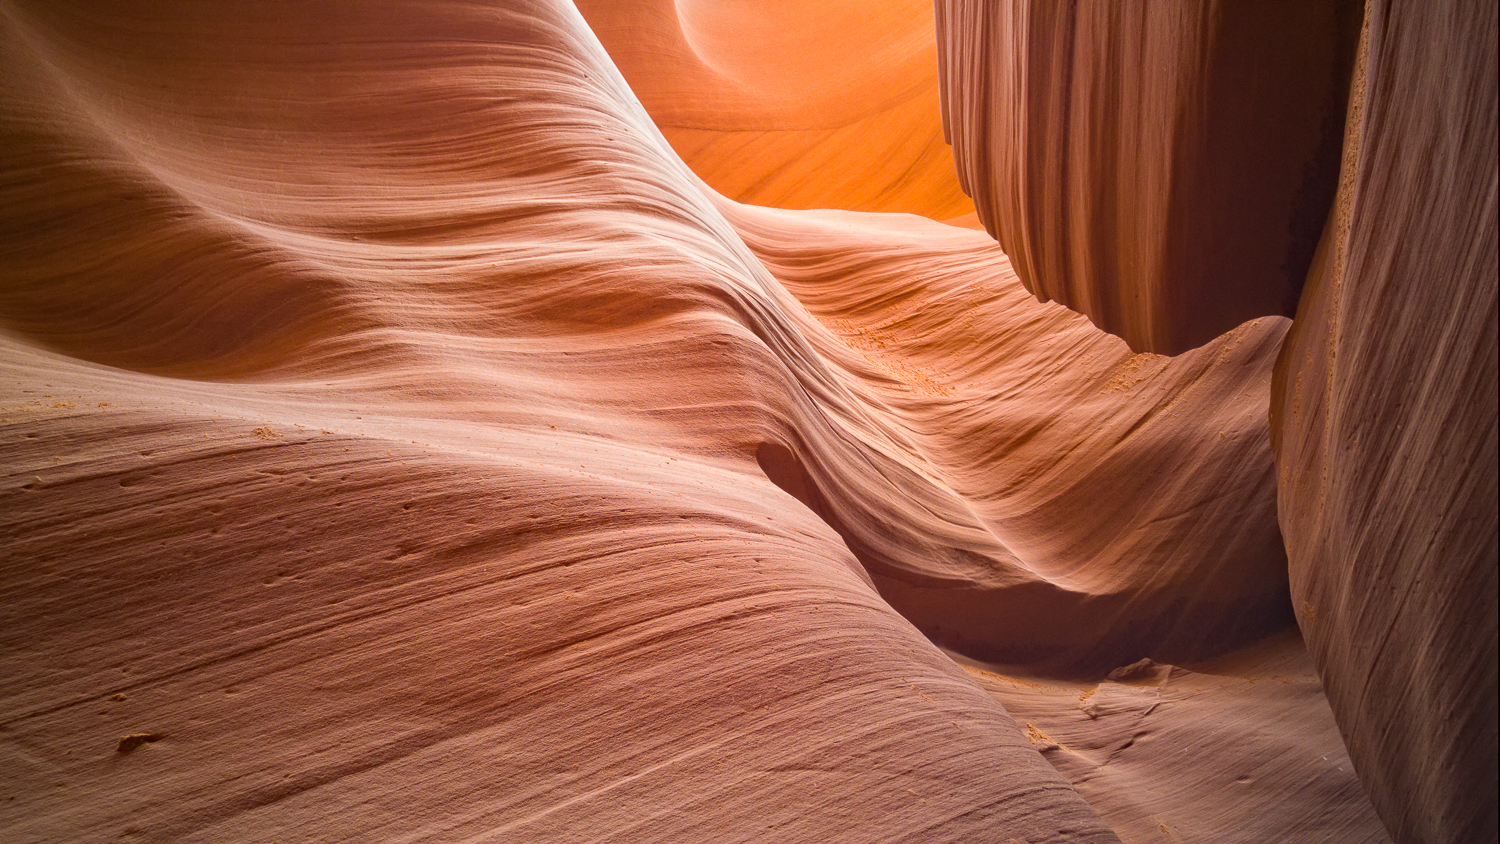 The G4 performed remarkebly well deep in the slot canyons of Arizona